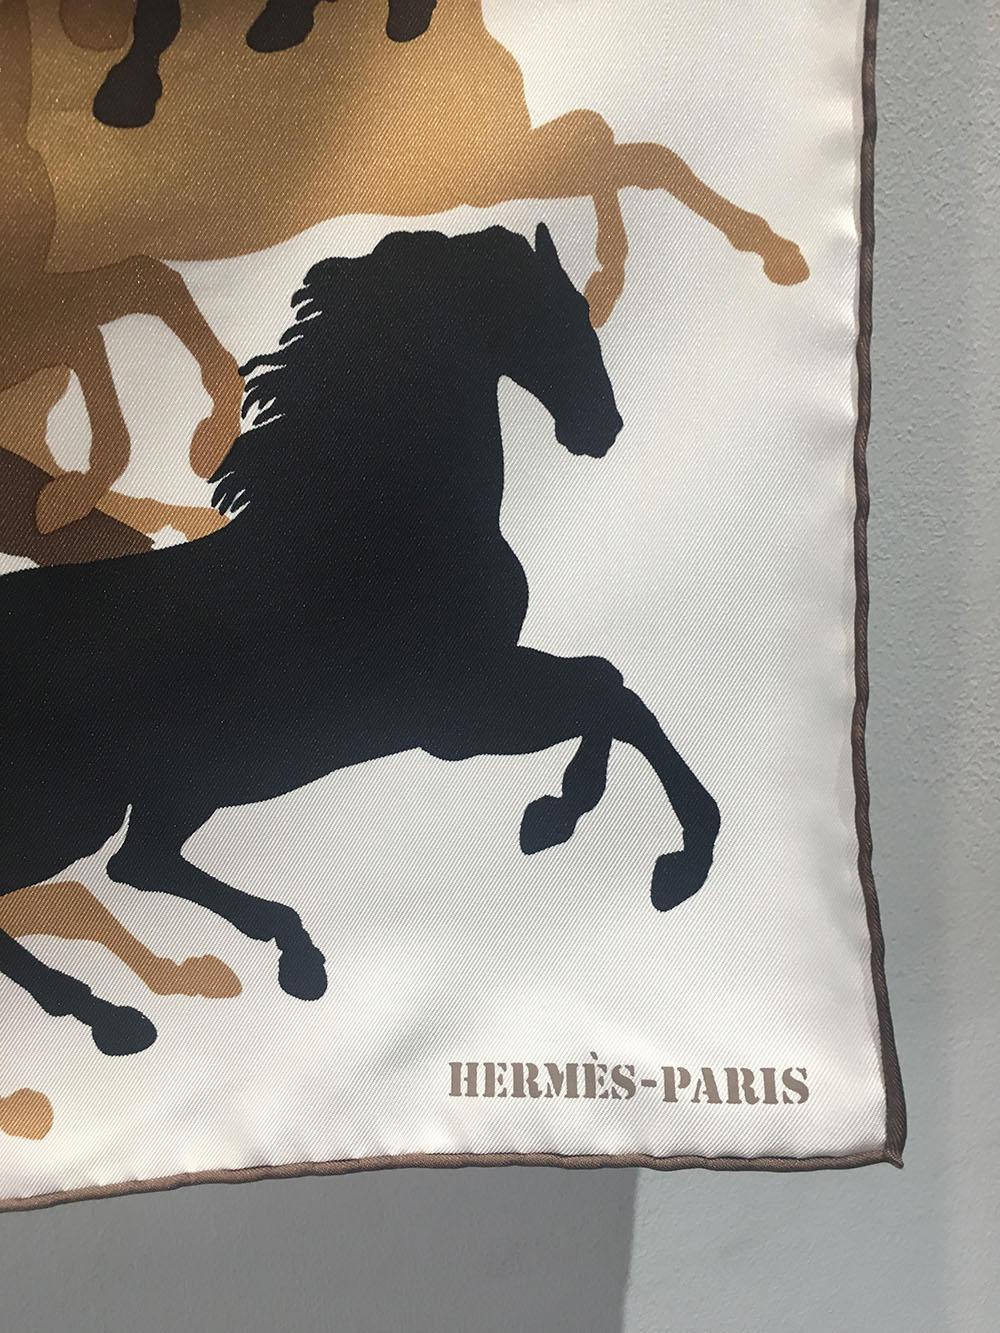 Brown Hermes Ex Libirs en Camouflage silk scarf in Tan black and white